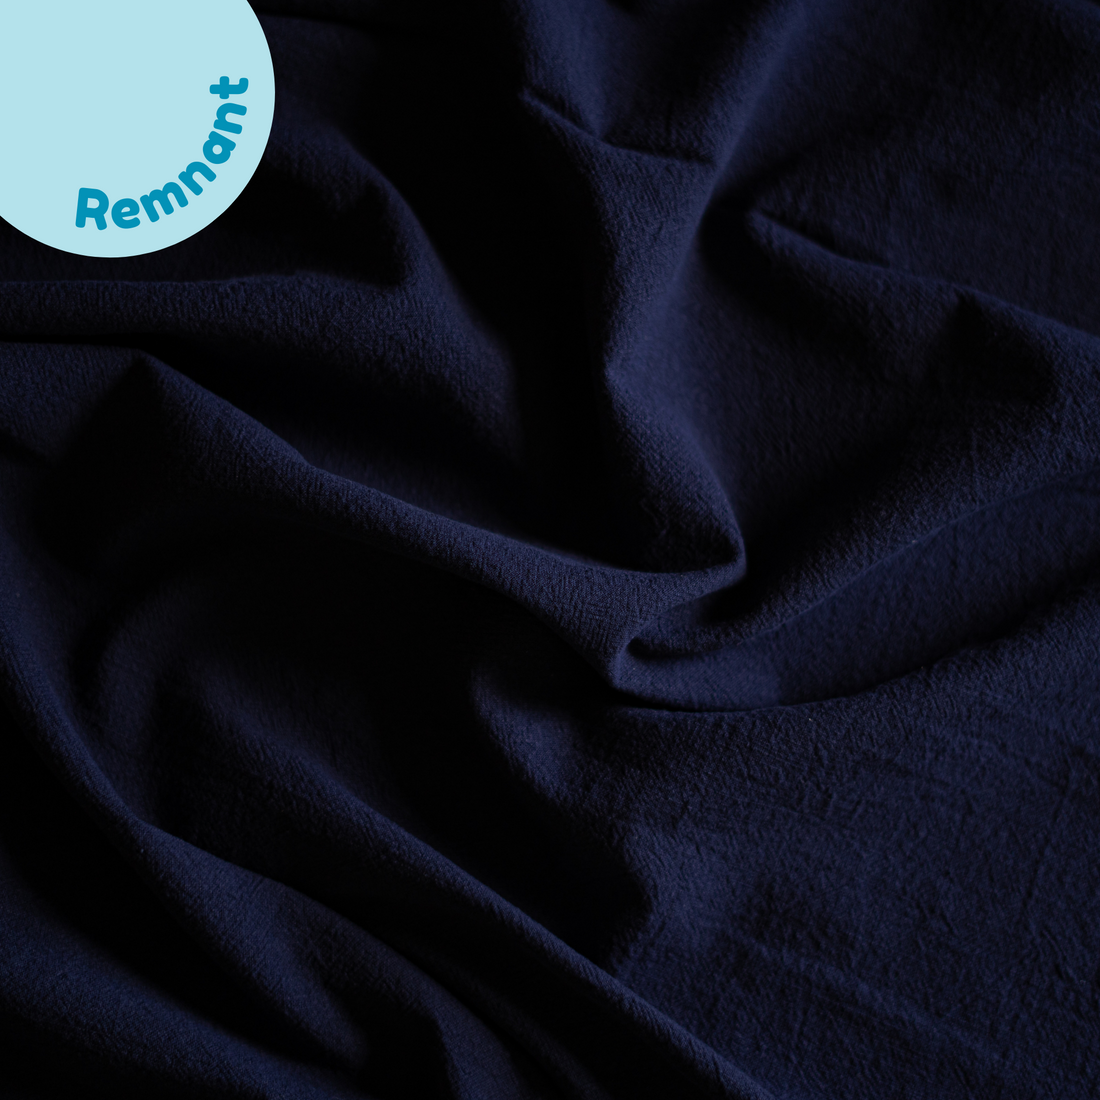 72cm REMNANT - Vintage Cotton in Navy Fabric